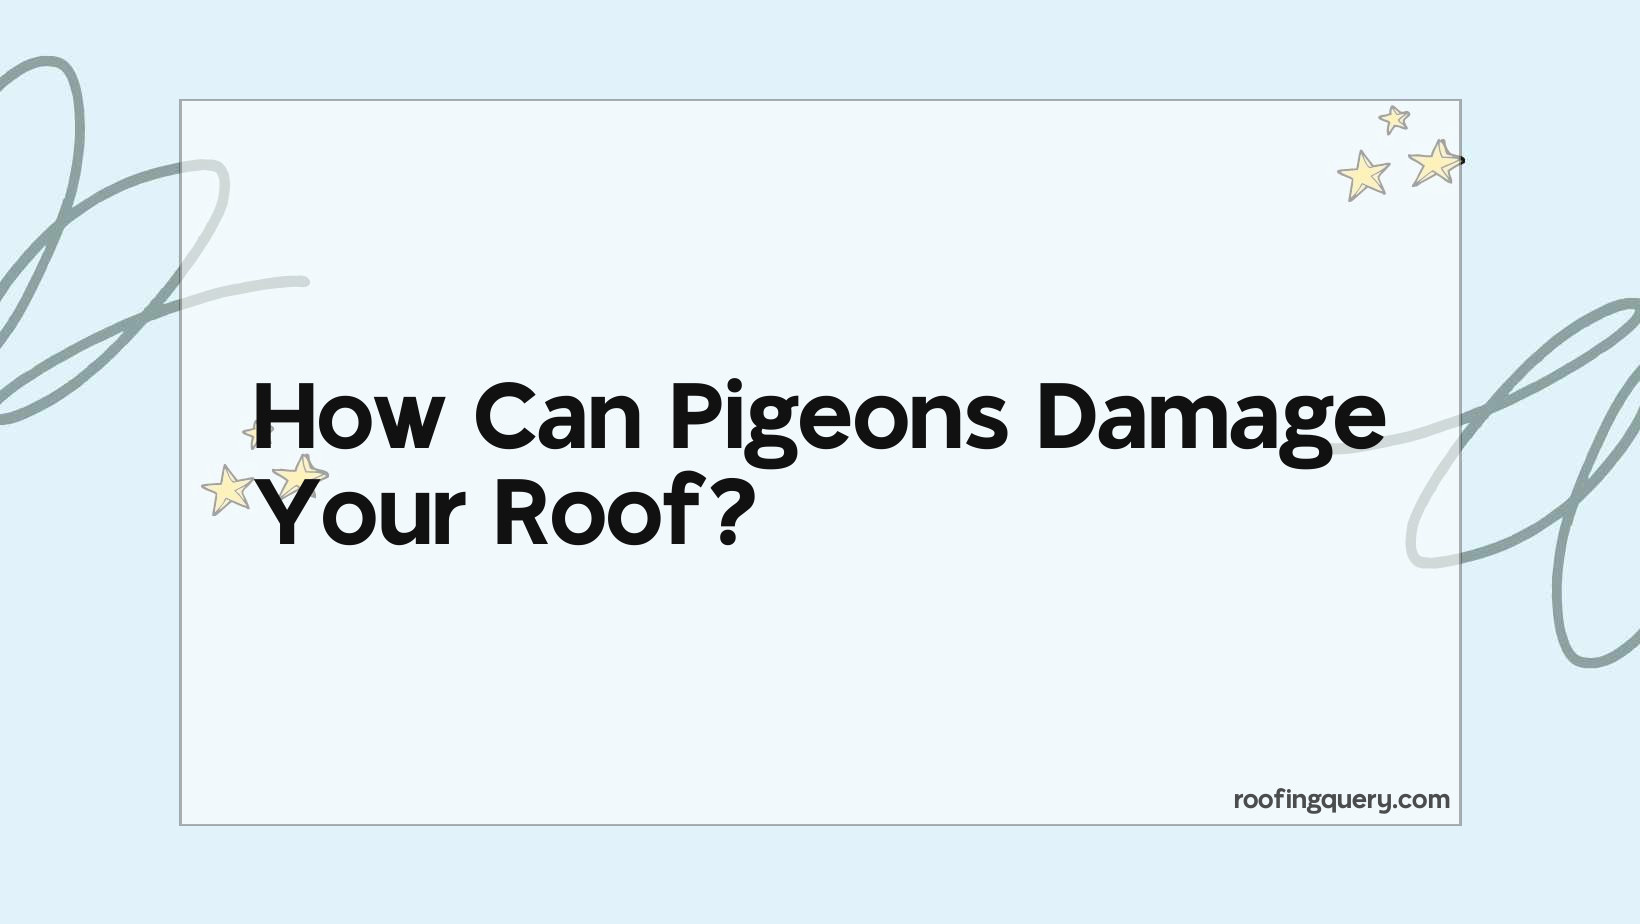 Can Pigeons Damage Your Roof